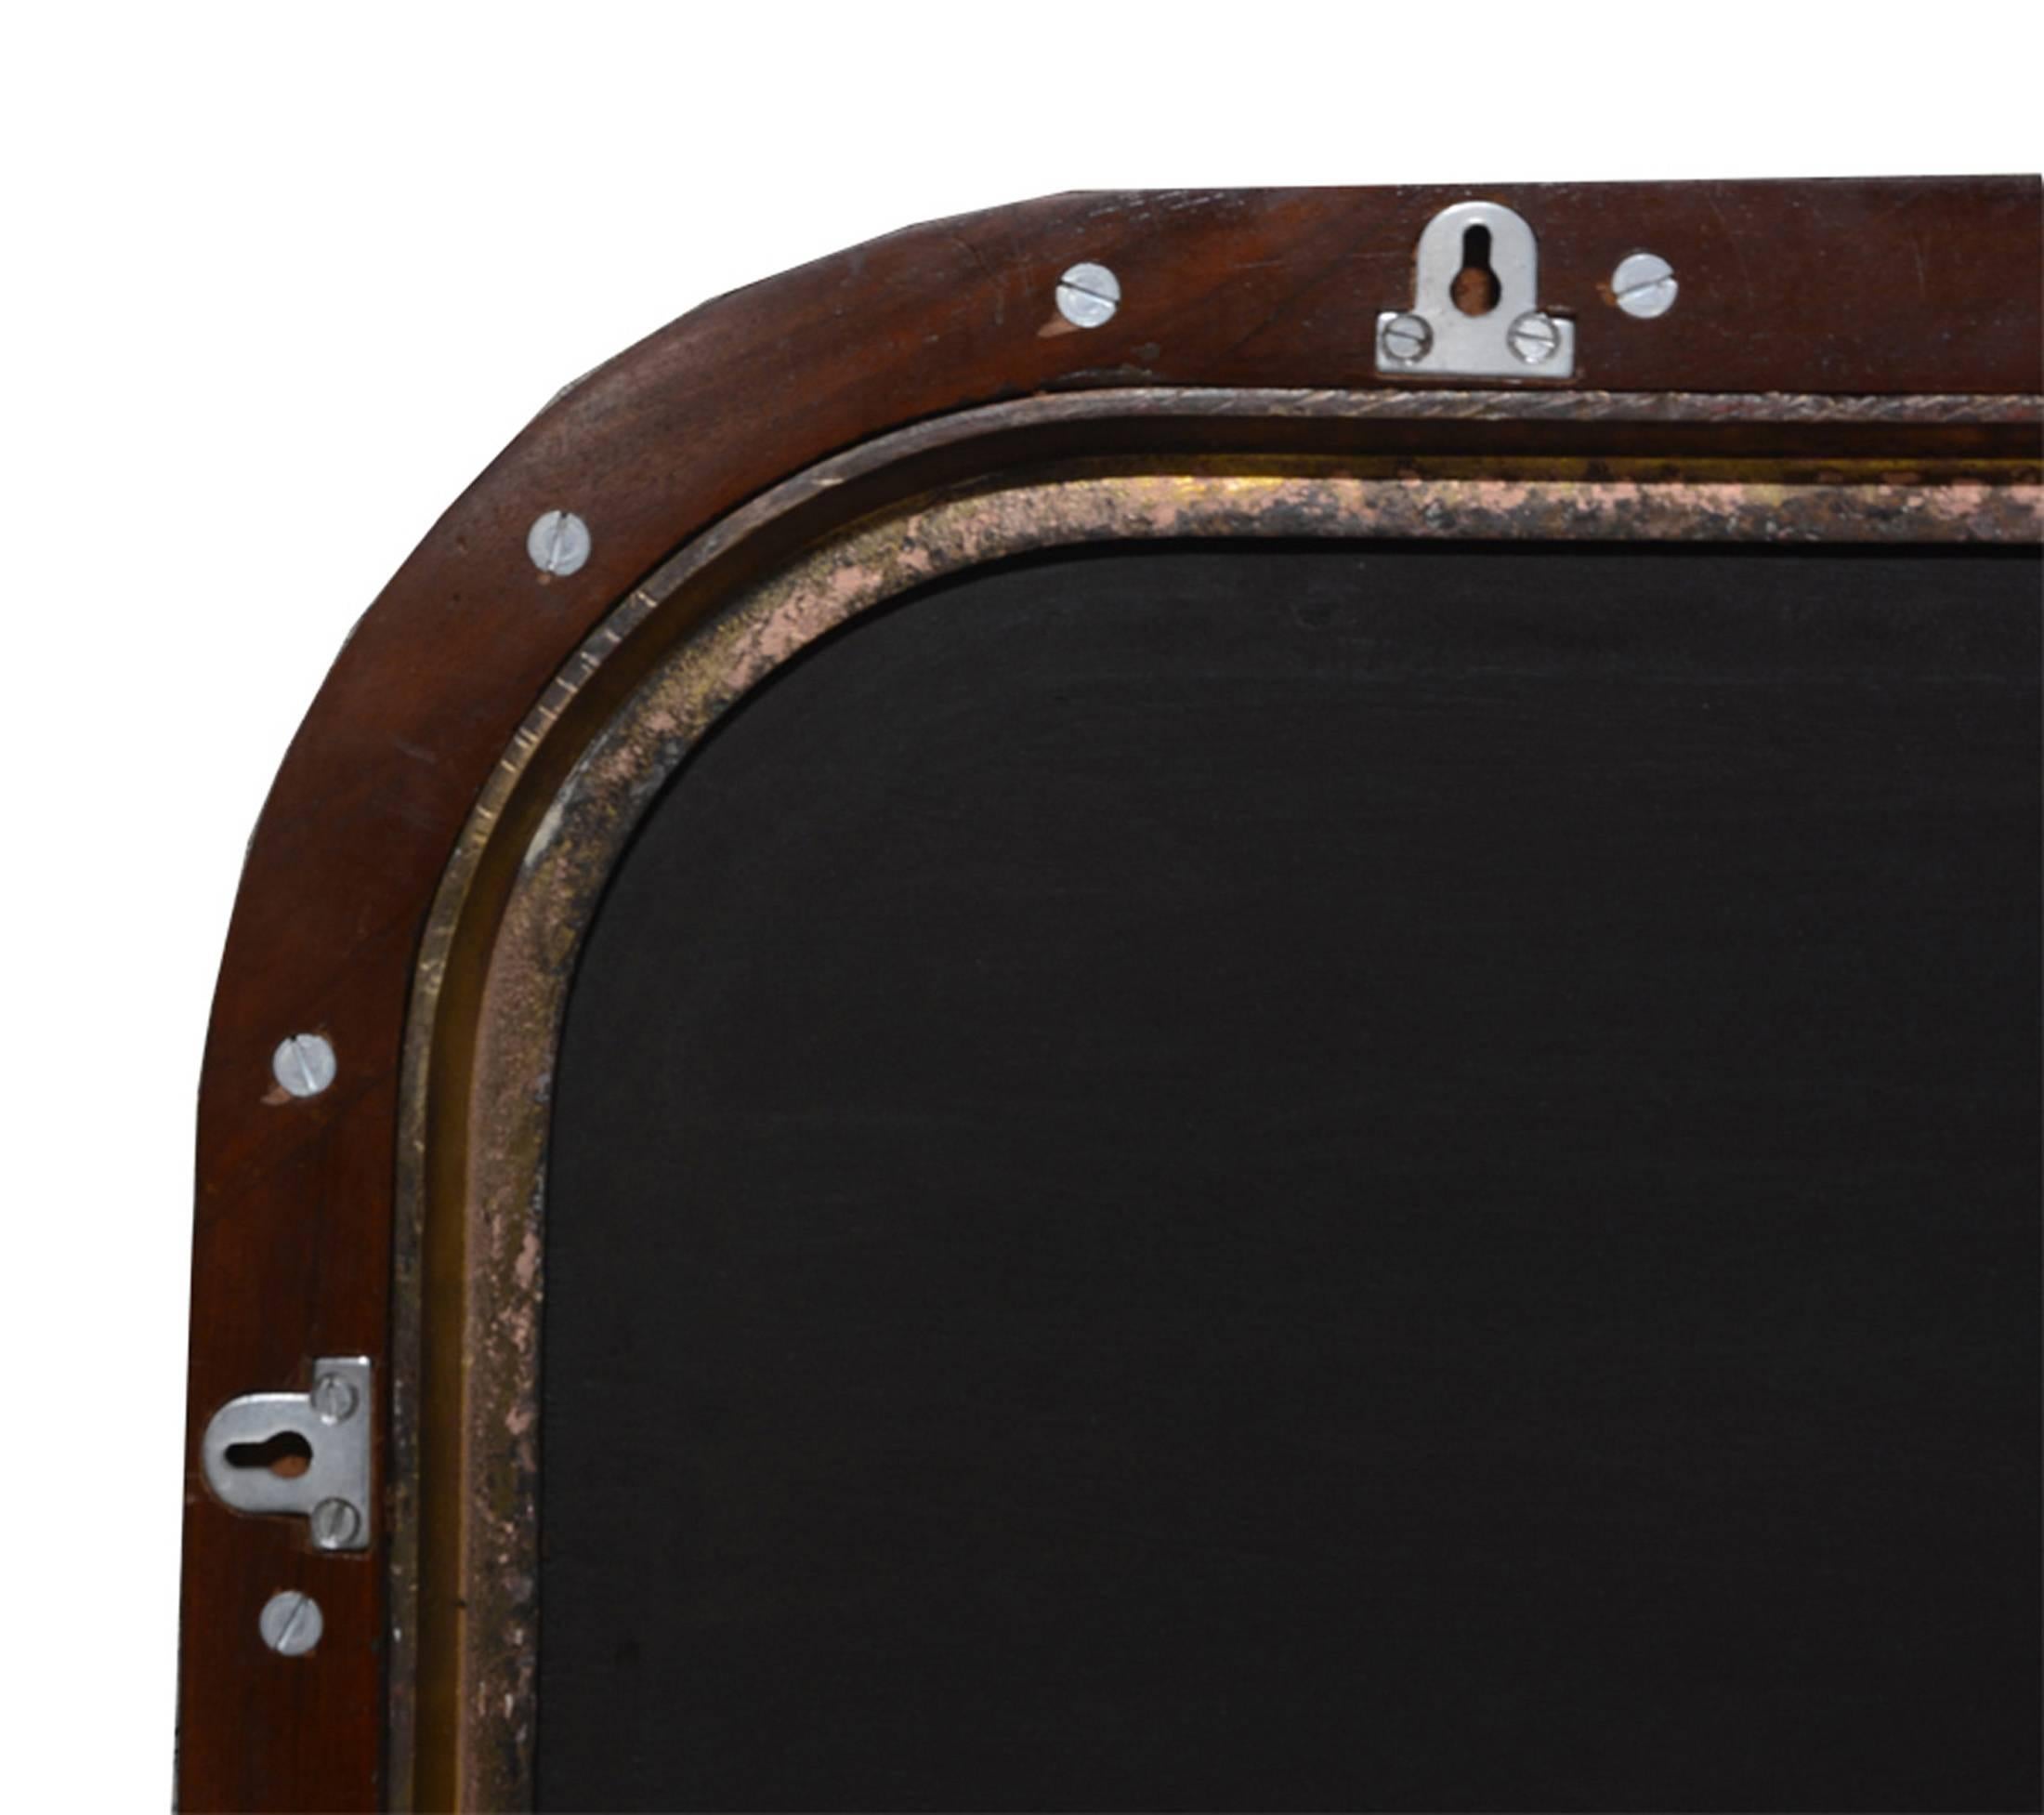 Original ship's brass porthole mirror, the holes are filled by blind bolts, fixing device on the back.

Measures: 67 x 57 cm / mirror 55 x 45 cm / depth 4.5 cm / 18.5 kg.